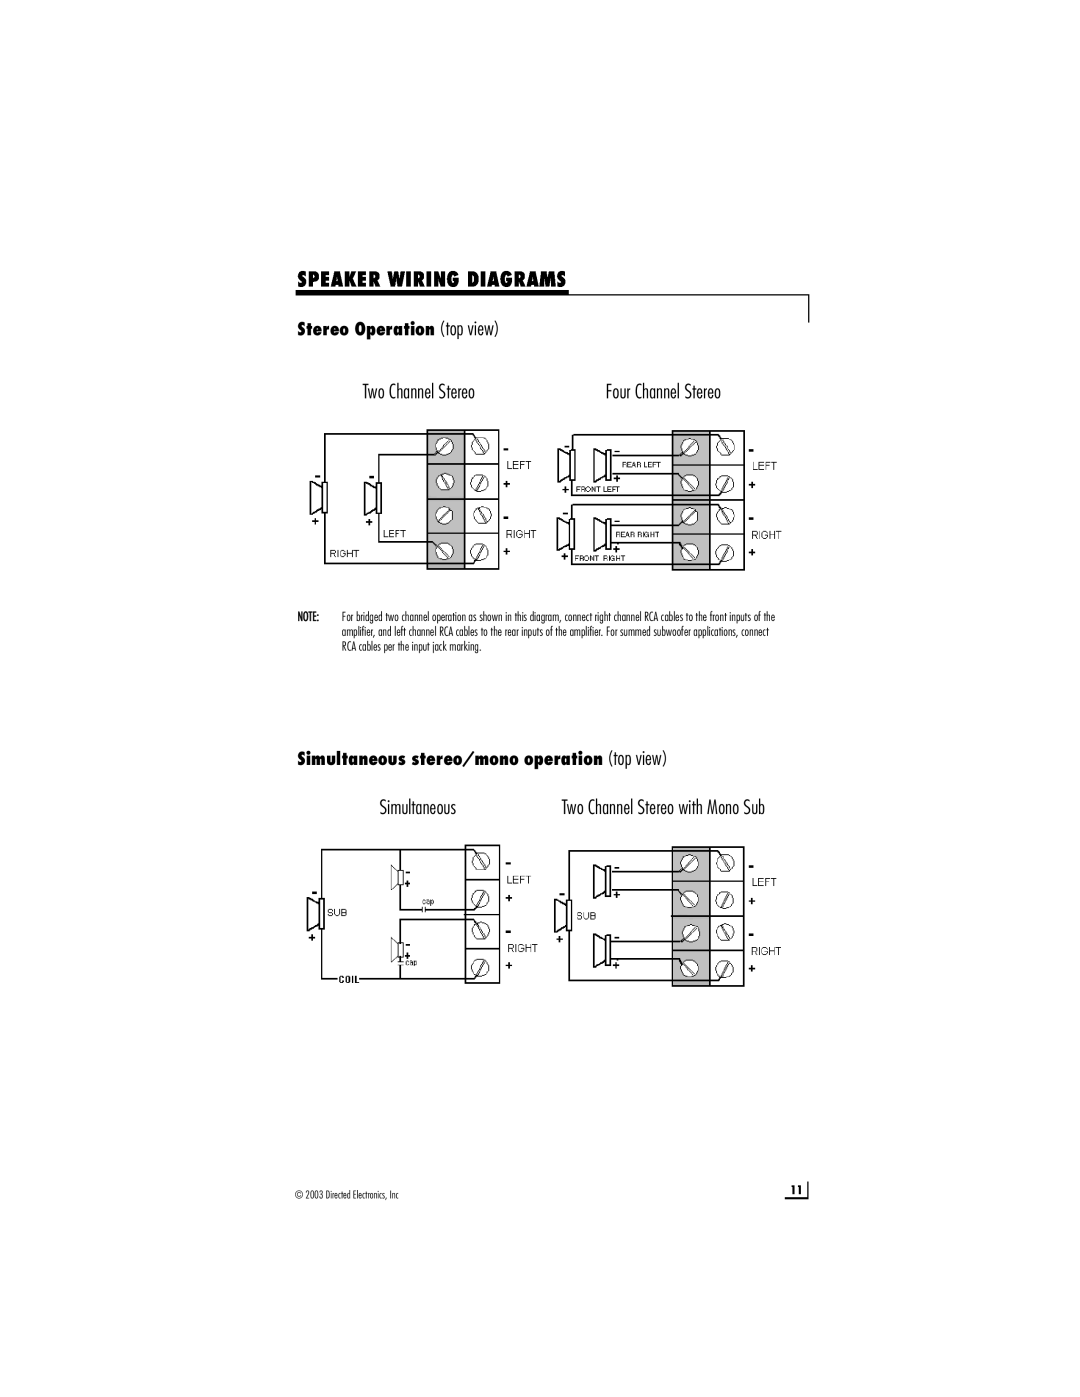 Directed Audio 600/4 manual Speaker Wiring Diagrams, Two Channel Stereo, Simultaneous, Stereo Operation top view 